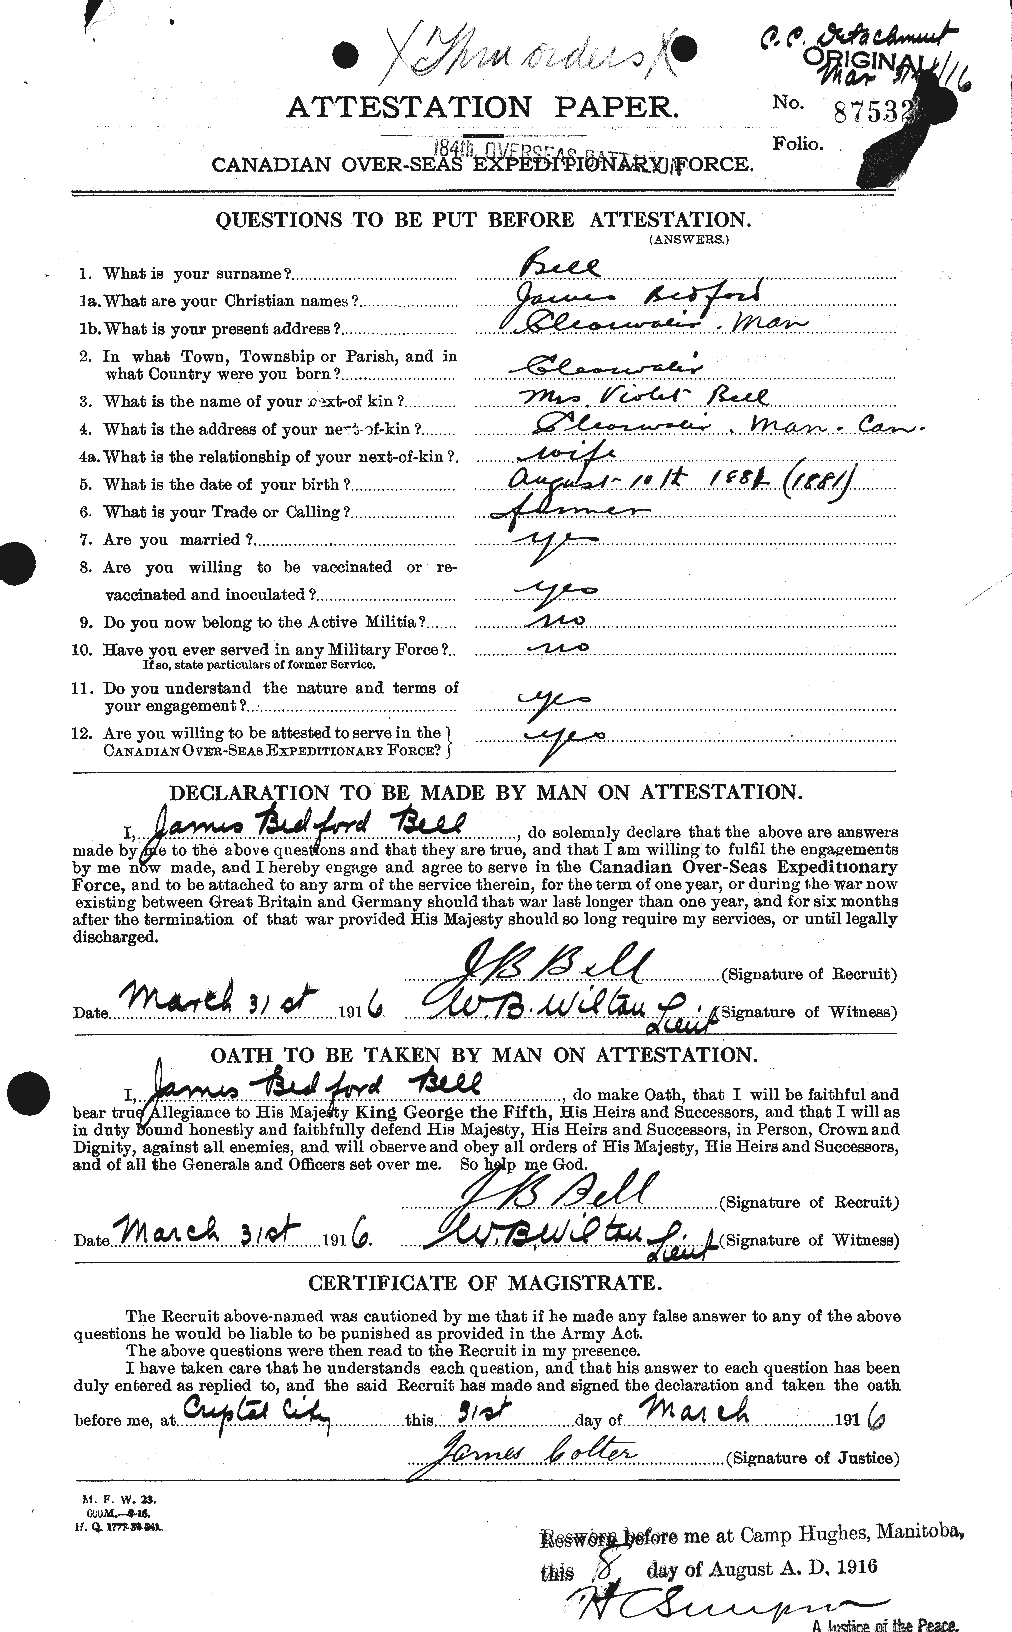 Personnel Records of the First World War - CEF 234339a